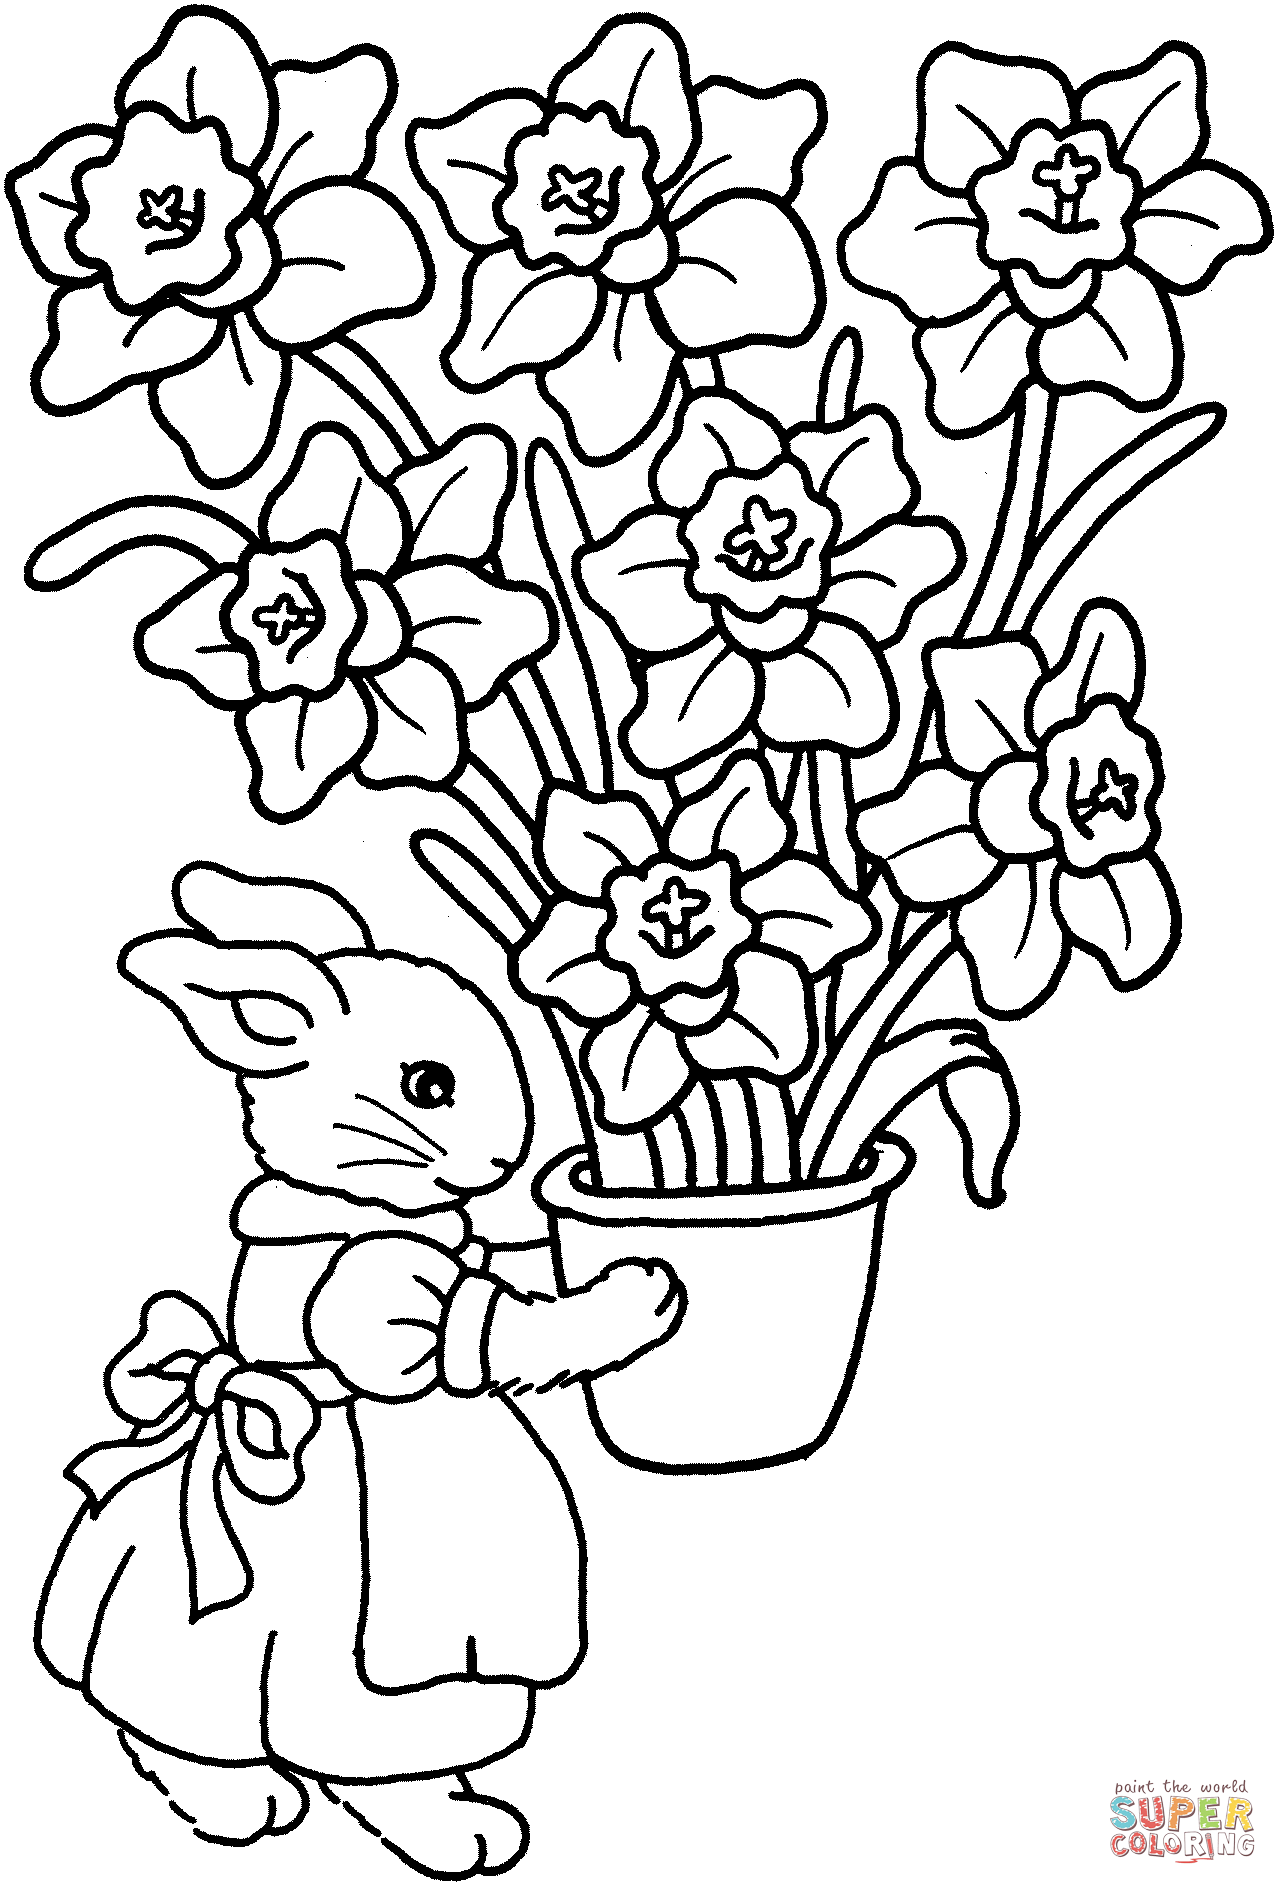 Bunny with Iris Vase Coloring Pages